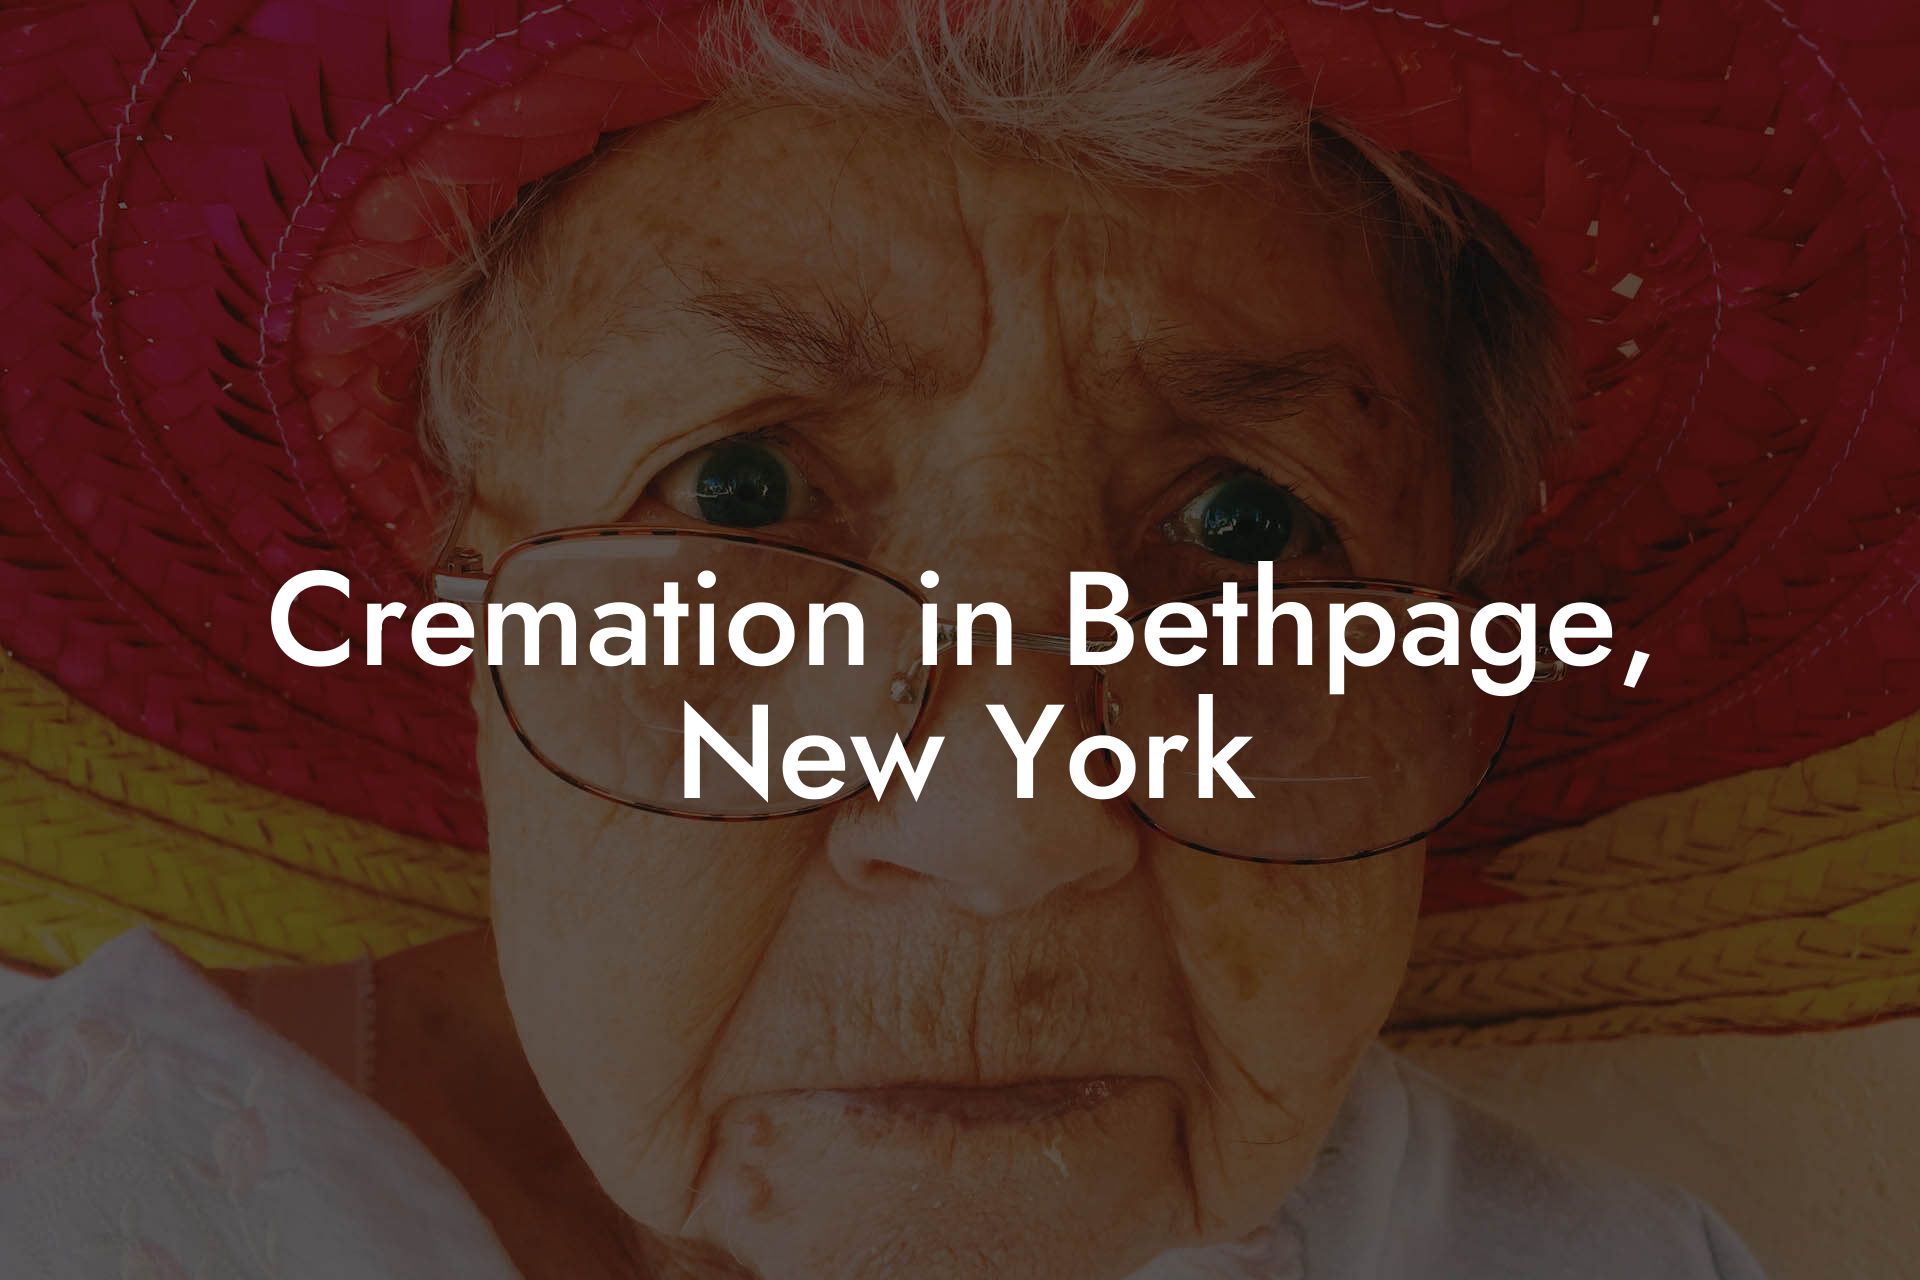 Cremation in Bethpage, New York